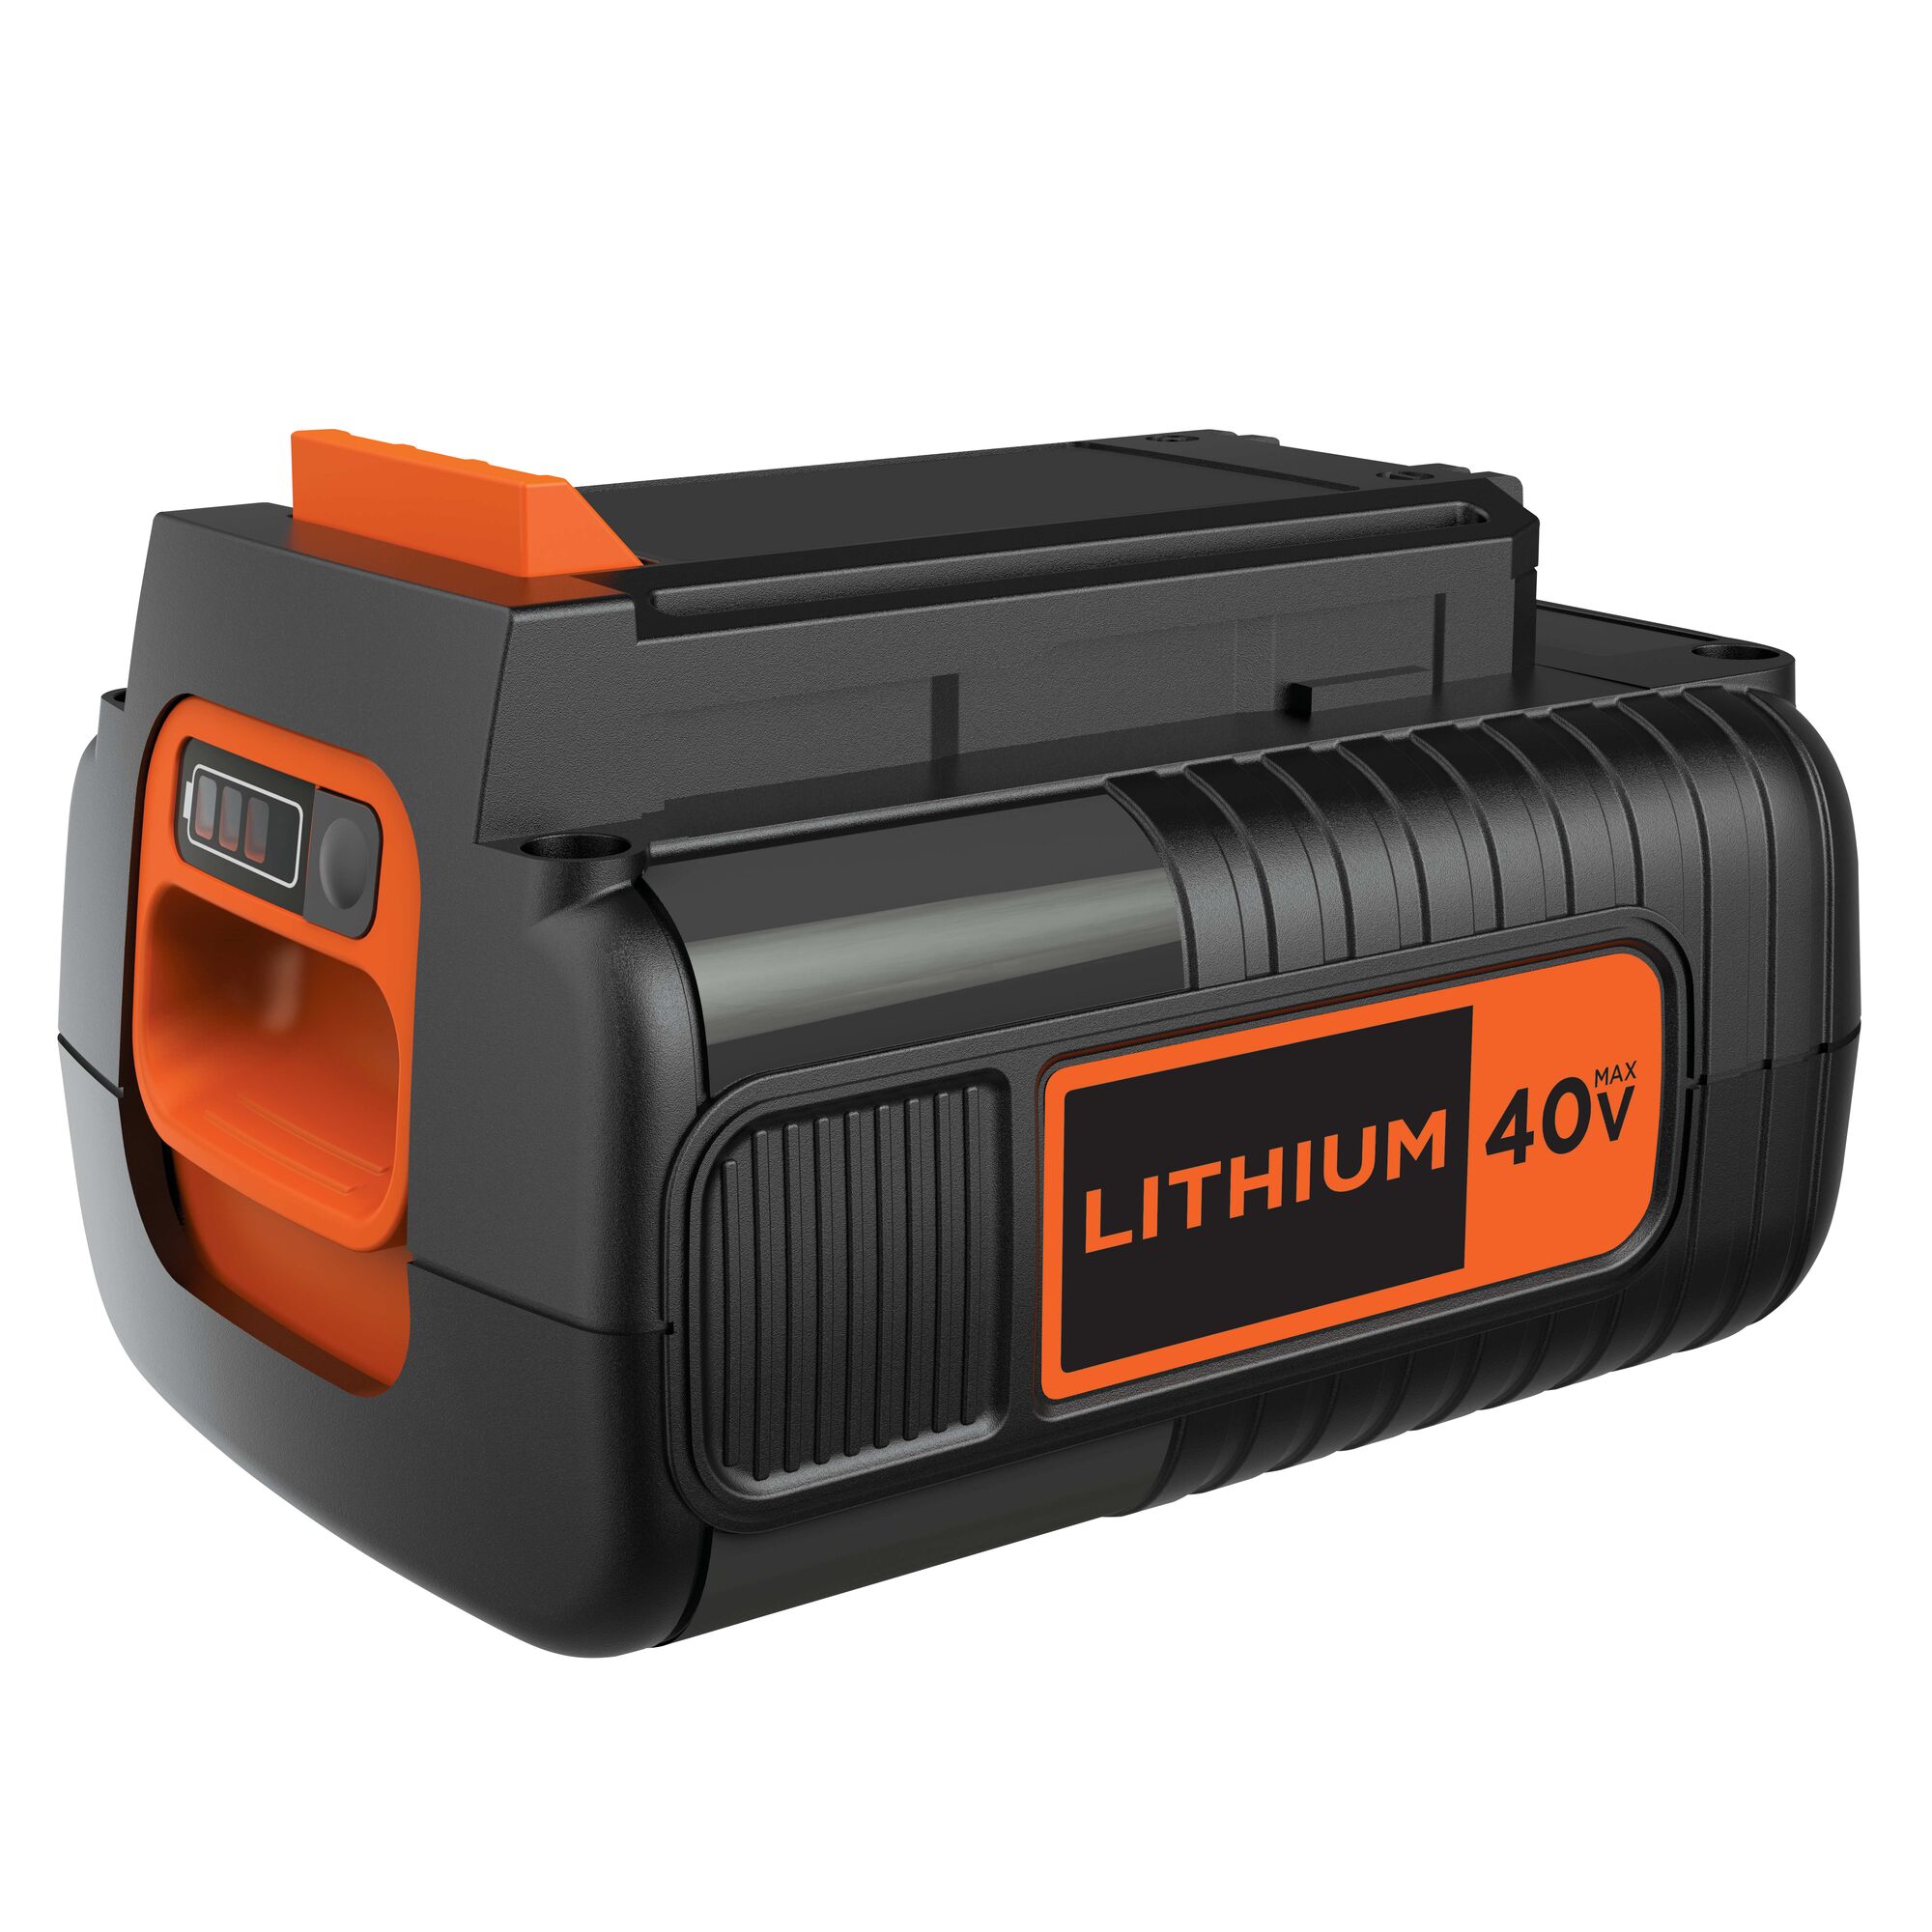 40V Max Interchangeable and rechargeable battery